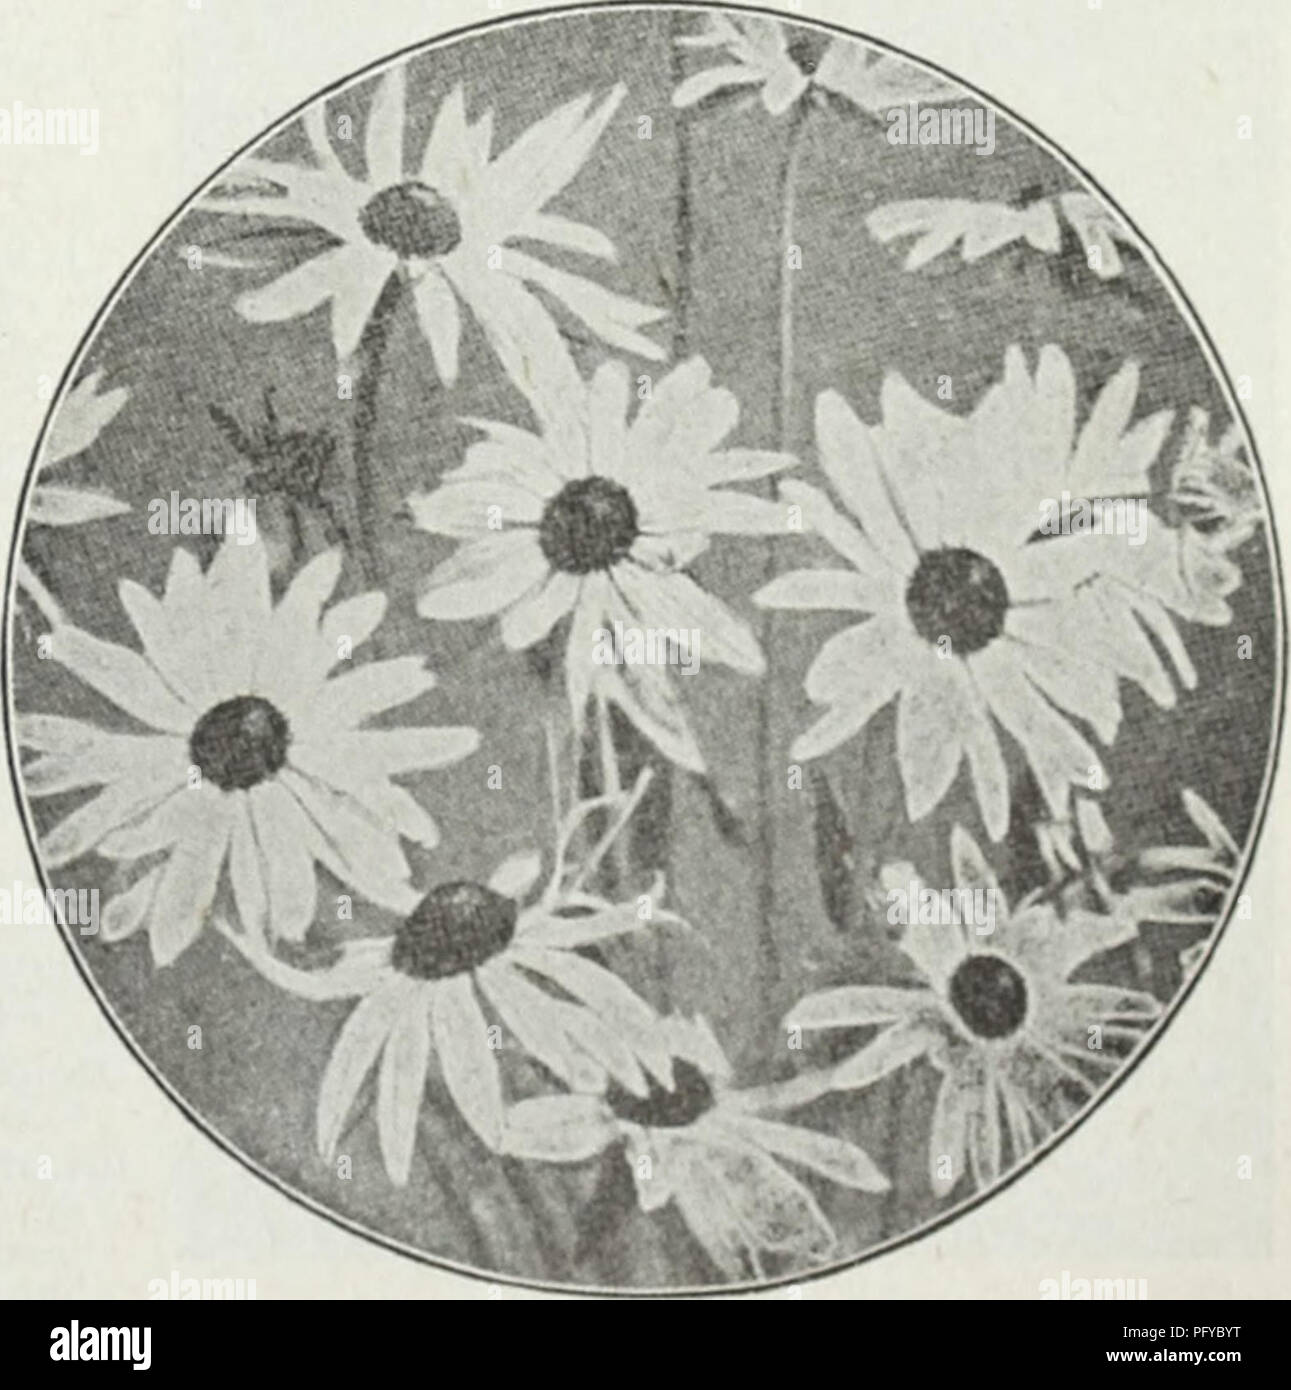 . Currie's farm and garden annual : spring 1930. Flowers Seeds Catalogs; Bulbs (Plants) Seeds Catalogs; Vegetables Seeds Catalogs; Nurseries (Horticulture) Catalogs; Plants, Ornamental Catalogs; Gardening Equipment and supplies Catalogs. RUDBECKIA (CONE FLOWER) Pkt. Bicolor Superba—Free-flowering annual, bearing bright yellow flowers with brown spots at the base, and brown disc SO. 10 Newmani—A showy hardy perennial with bright orange flowers and a black cone. .10 Purpurea—A hardy perennial bearing large, showy reddish-purple flowers with a large cone-shaped center 15 ROSES Pkt Little Midgets  Stock Photo